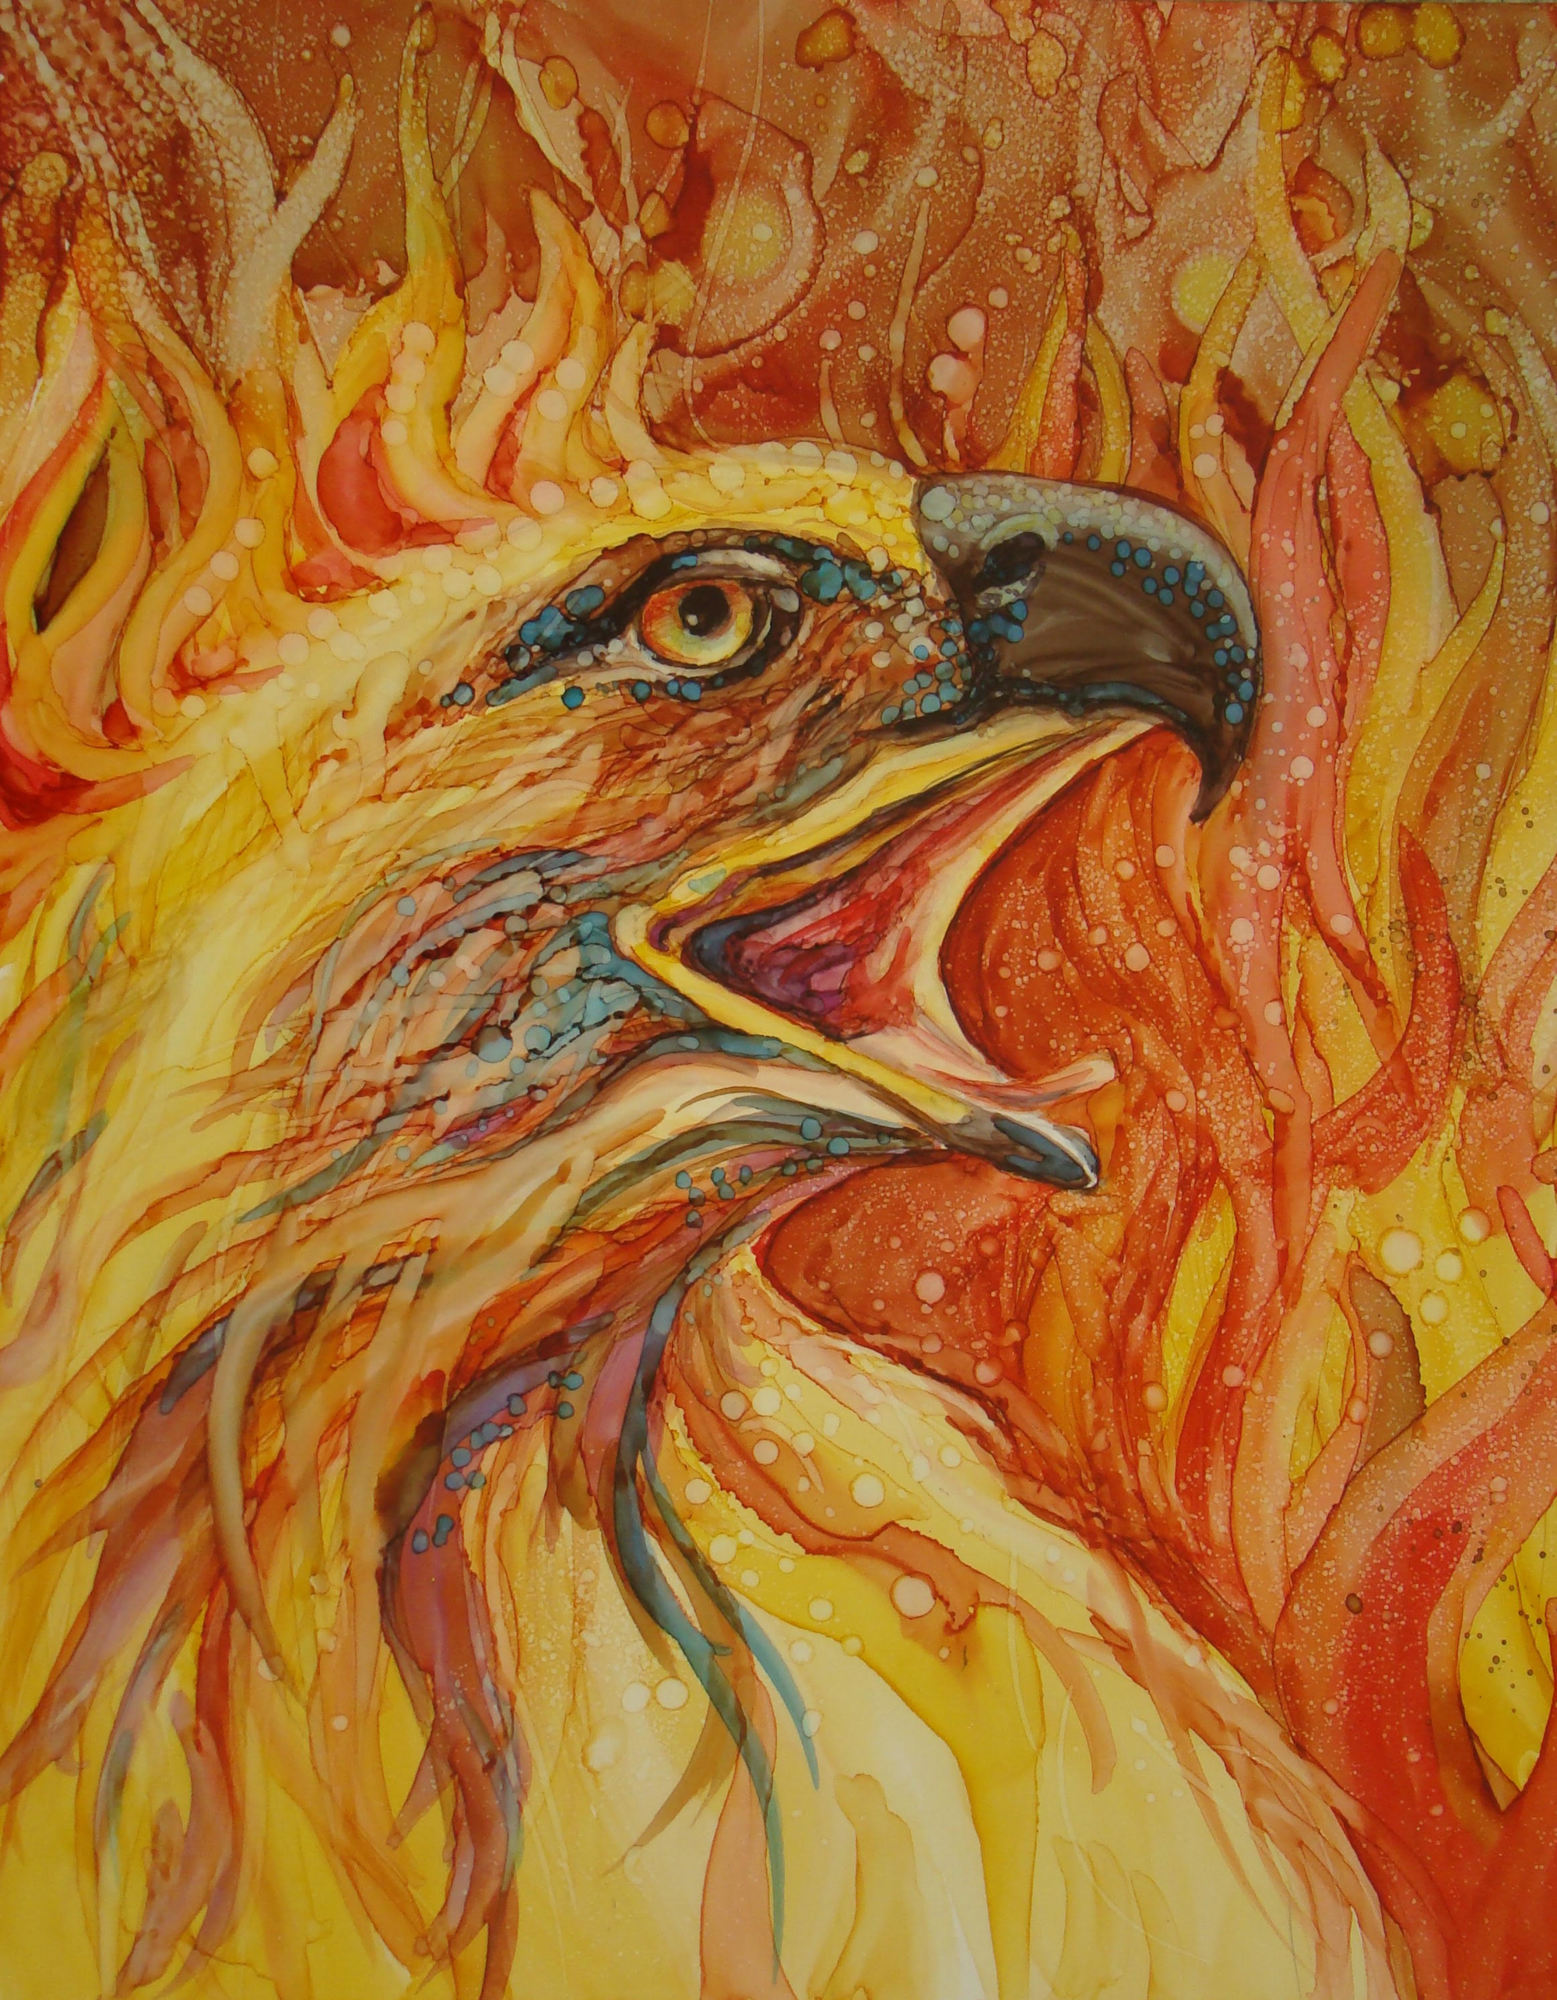 Painter Susan Grogan painted this Phoenix head, called “On Fire,” in honor of the SoBo Gallery and Art Center’s five-year anniversary.